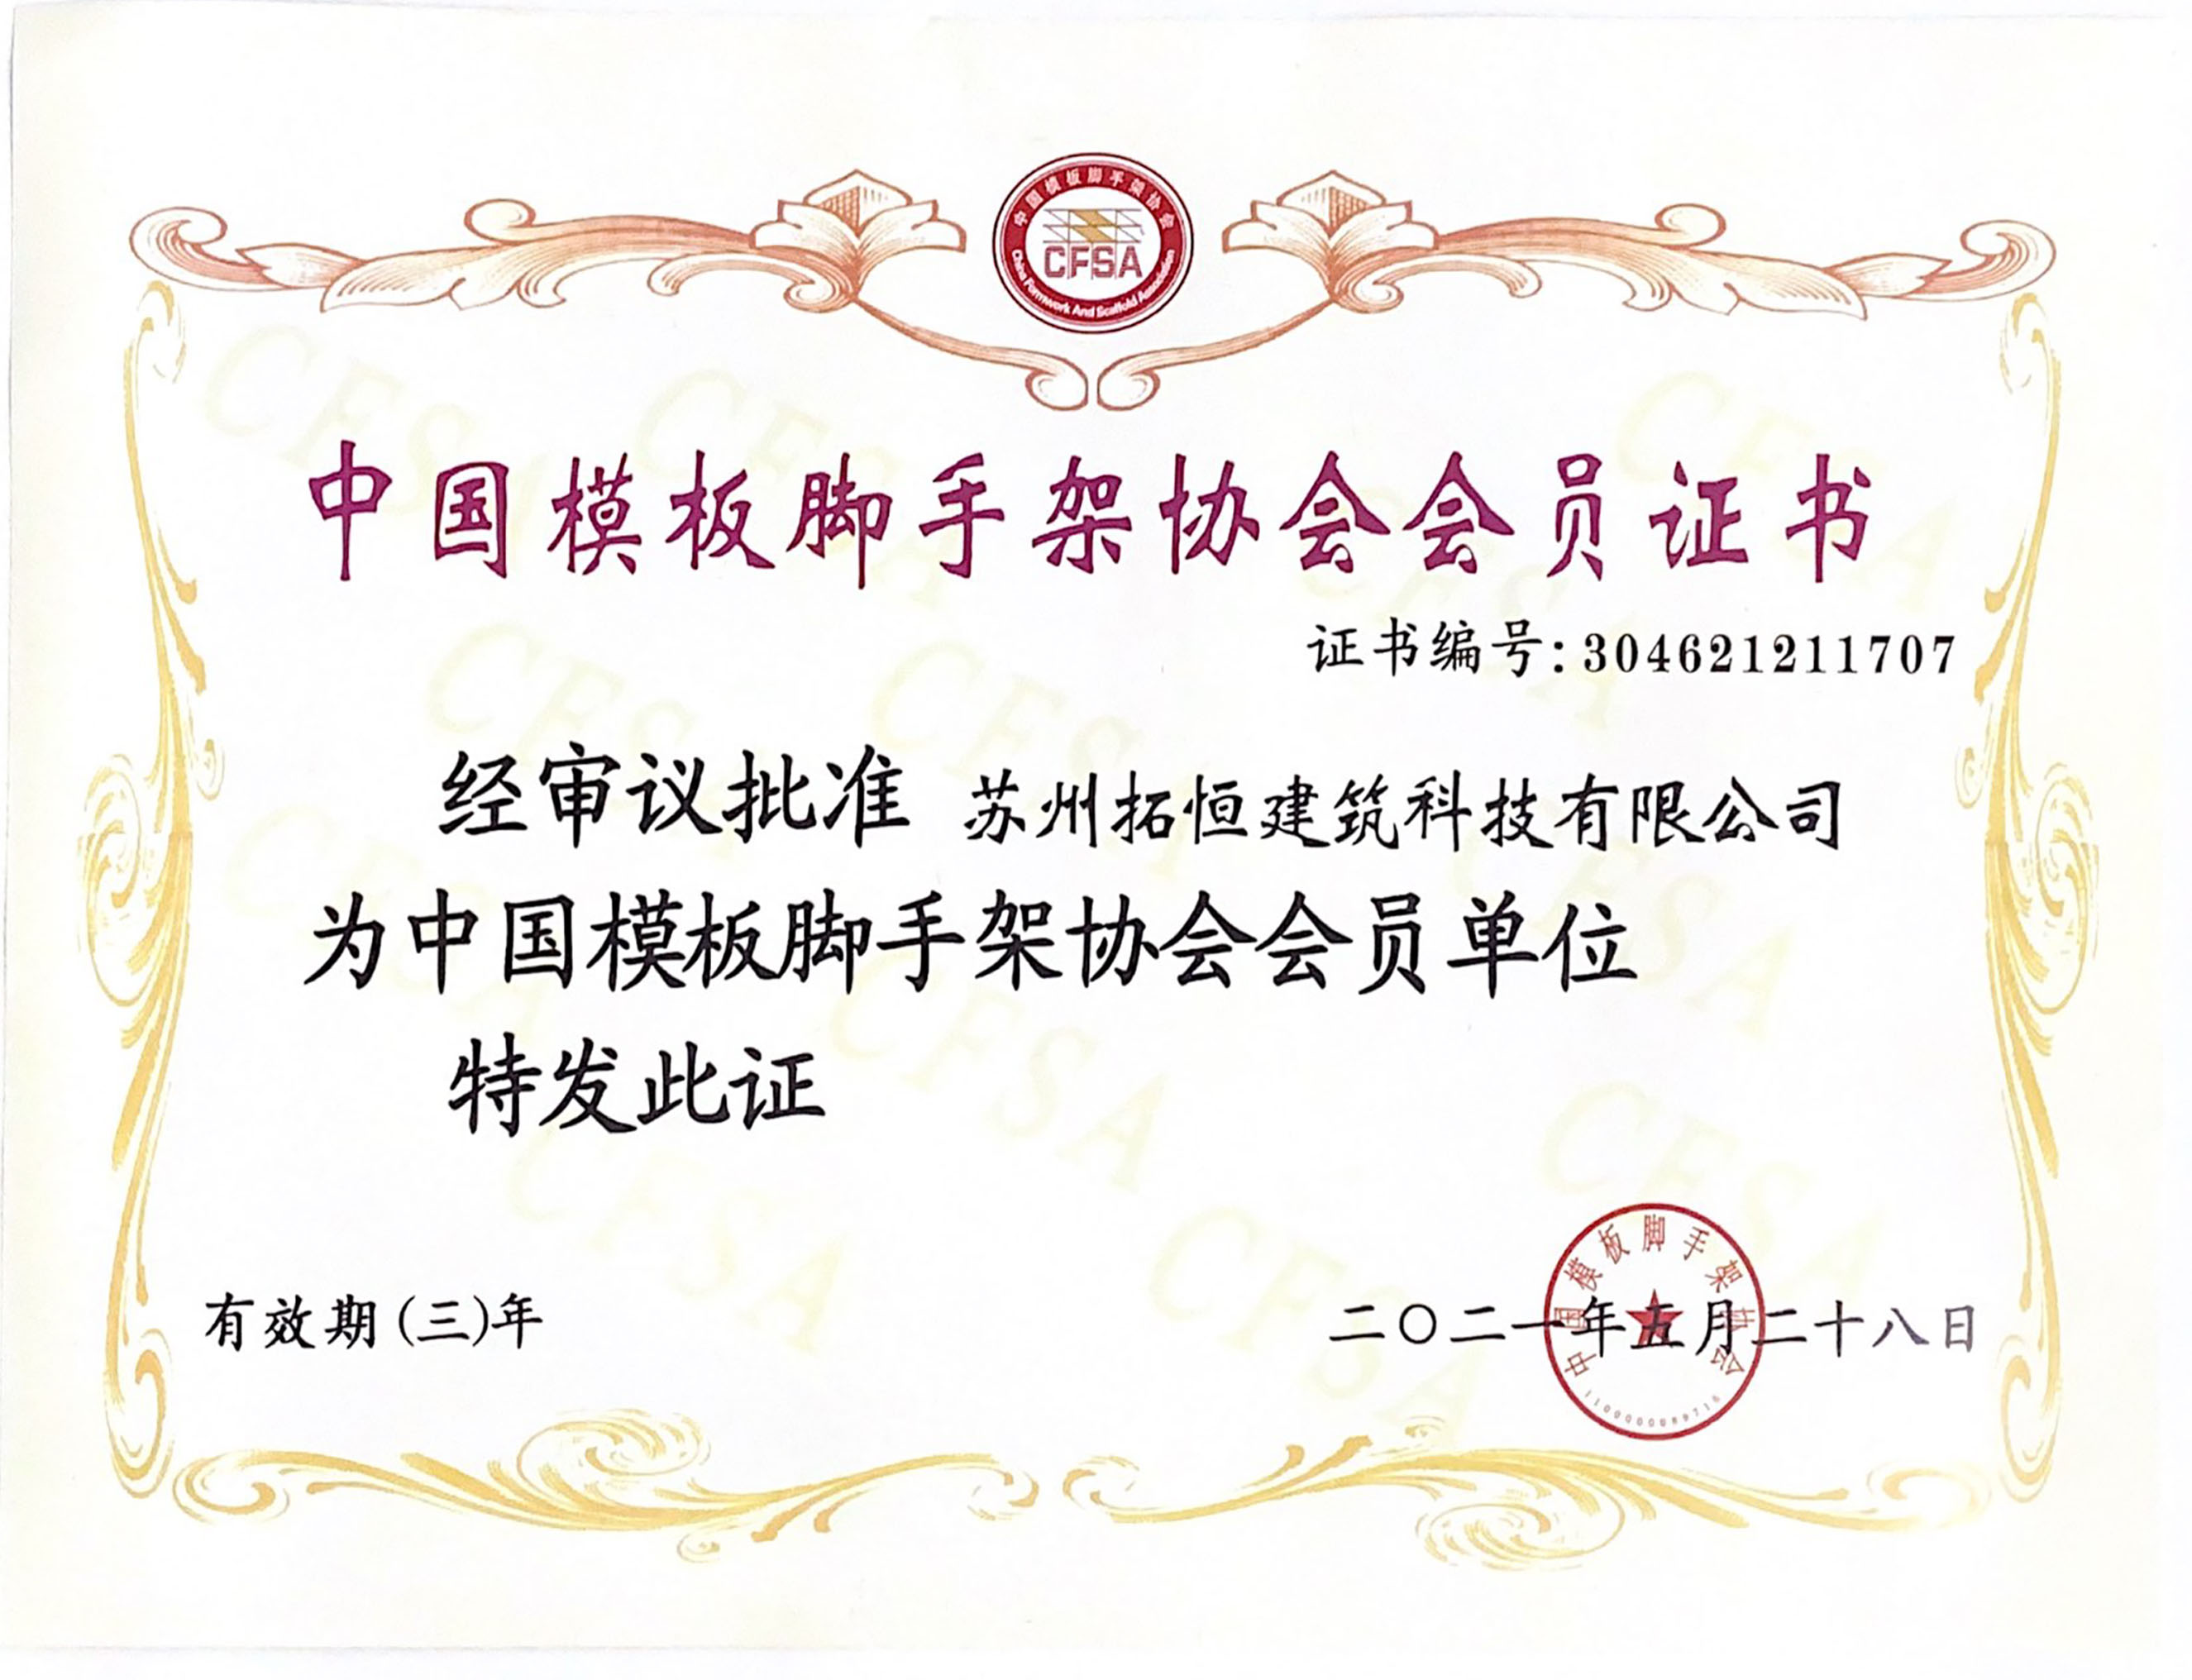 Membership certificate of China Formwork And Scaffold Association.jpg